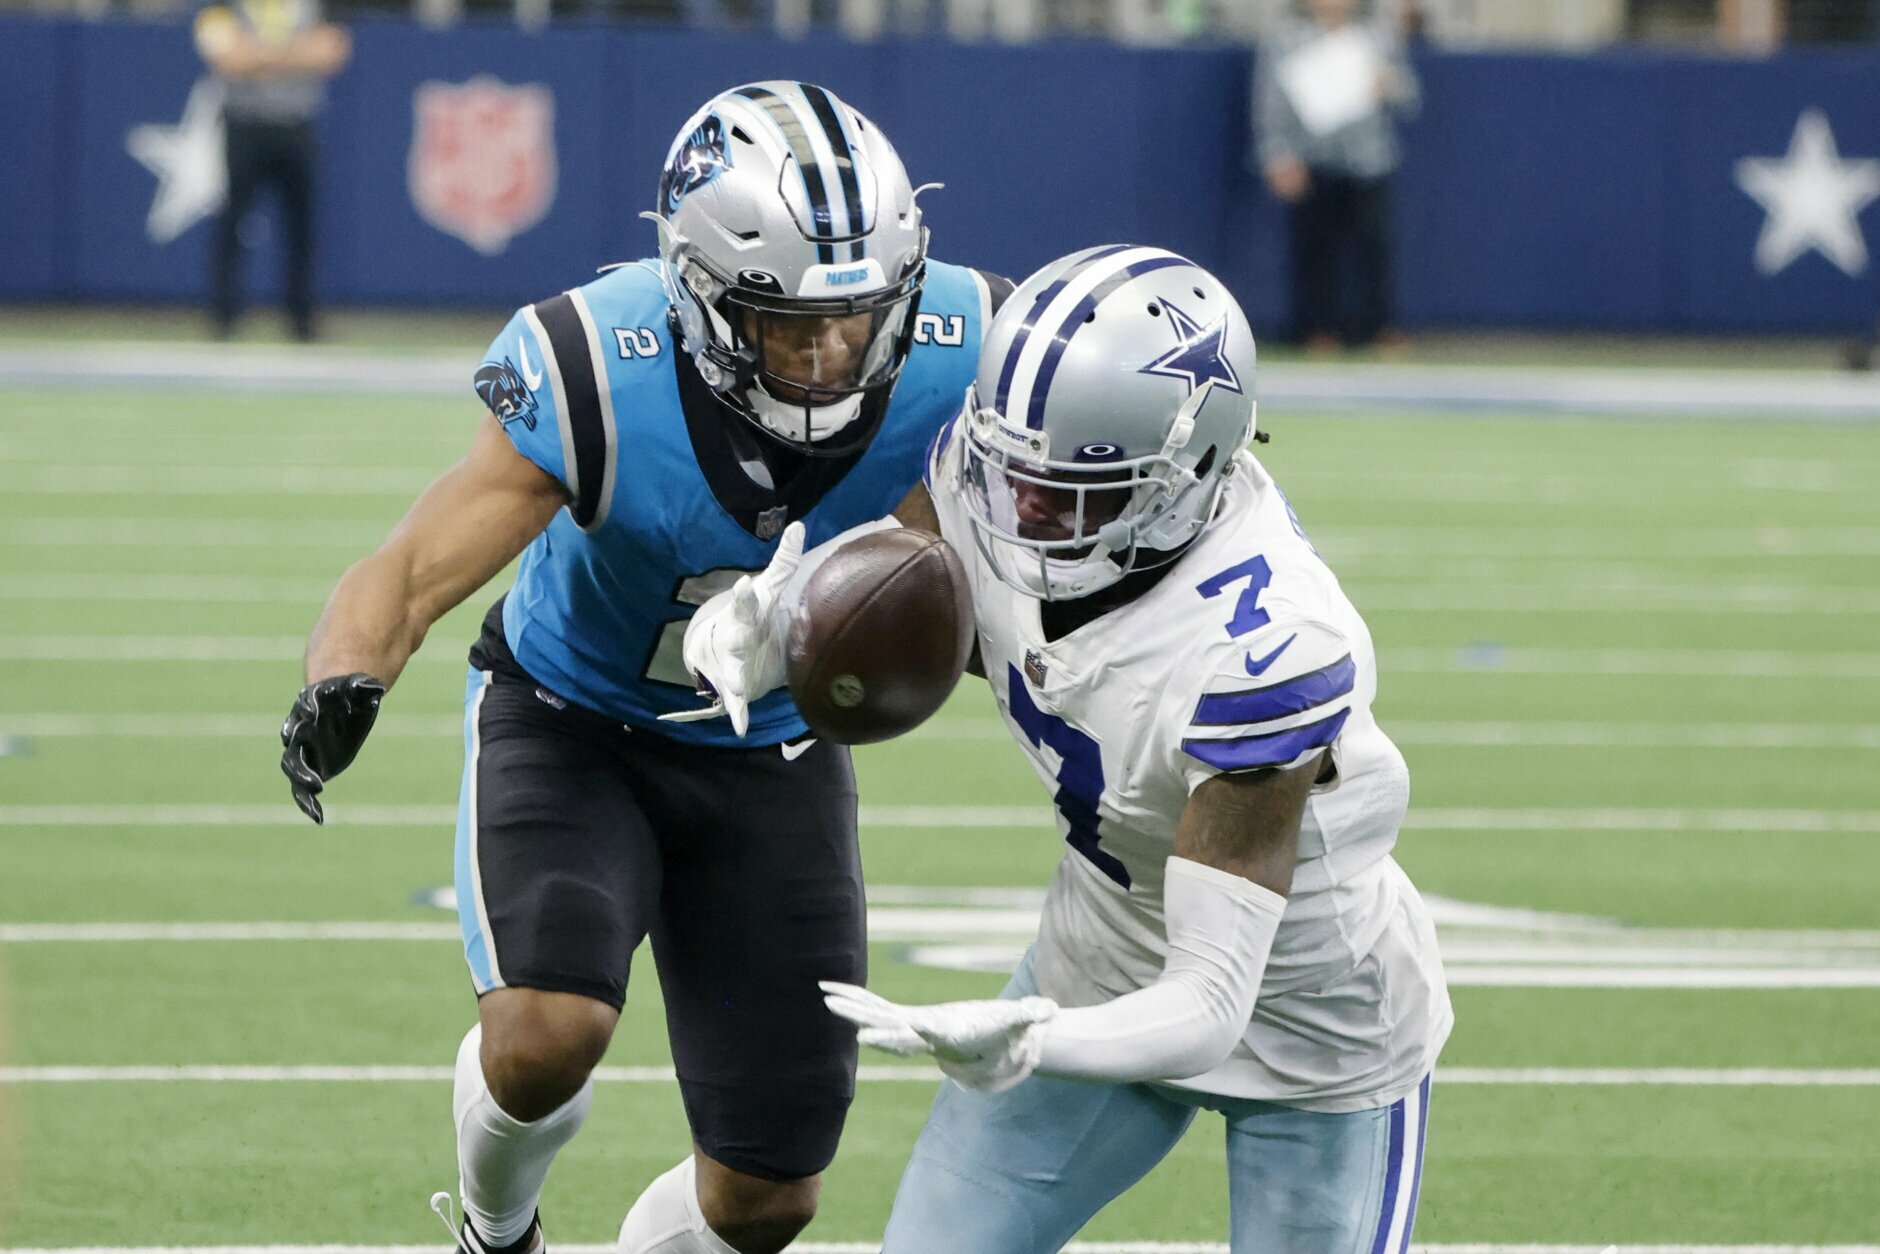 <p><b><i>Panthers 28</i></b><br />
<b><i>Cowboys 36</i></b></p>
<p>Way too much emphasis is being placed on <a href="https://profootballtalk.nbcsports.com/2021/09/28/dak-prescott-i-feel-like-im-playing-the-best-ive-ever-played/">Dak Prescott&#8217;s reemergence</a> and not enough on Travon Diggs&#8217; breakout sophomore season. The Gaithersburg native has a league-best five interceptions in the first four games of the season and looks like a legit star in the making for the team with a star on their helmets.</p>
